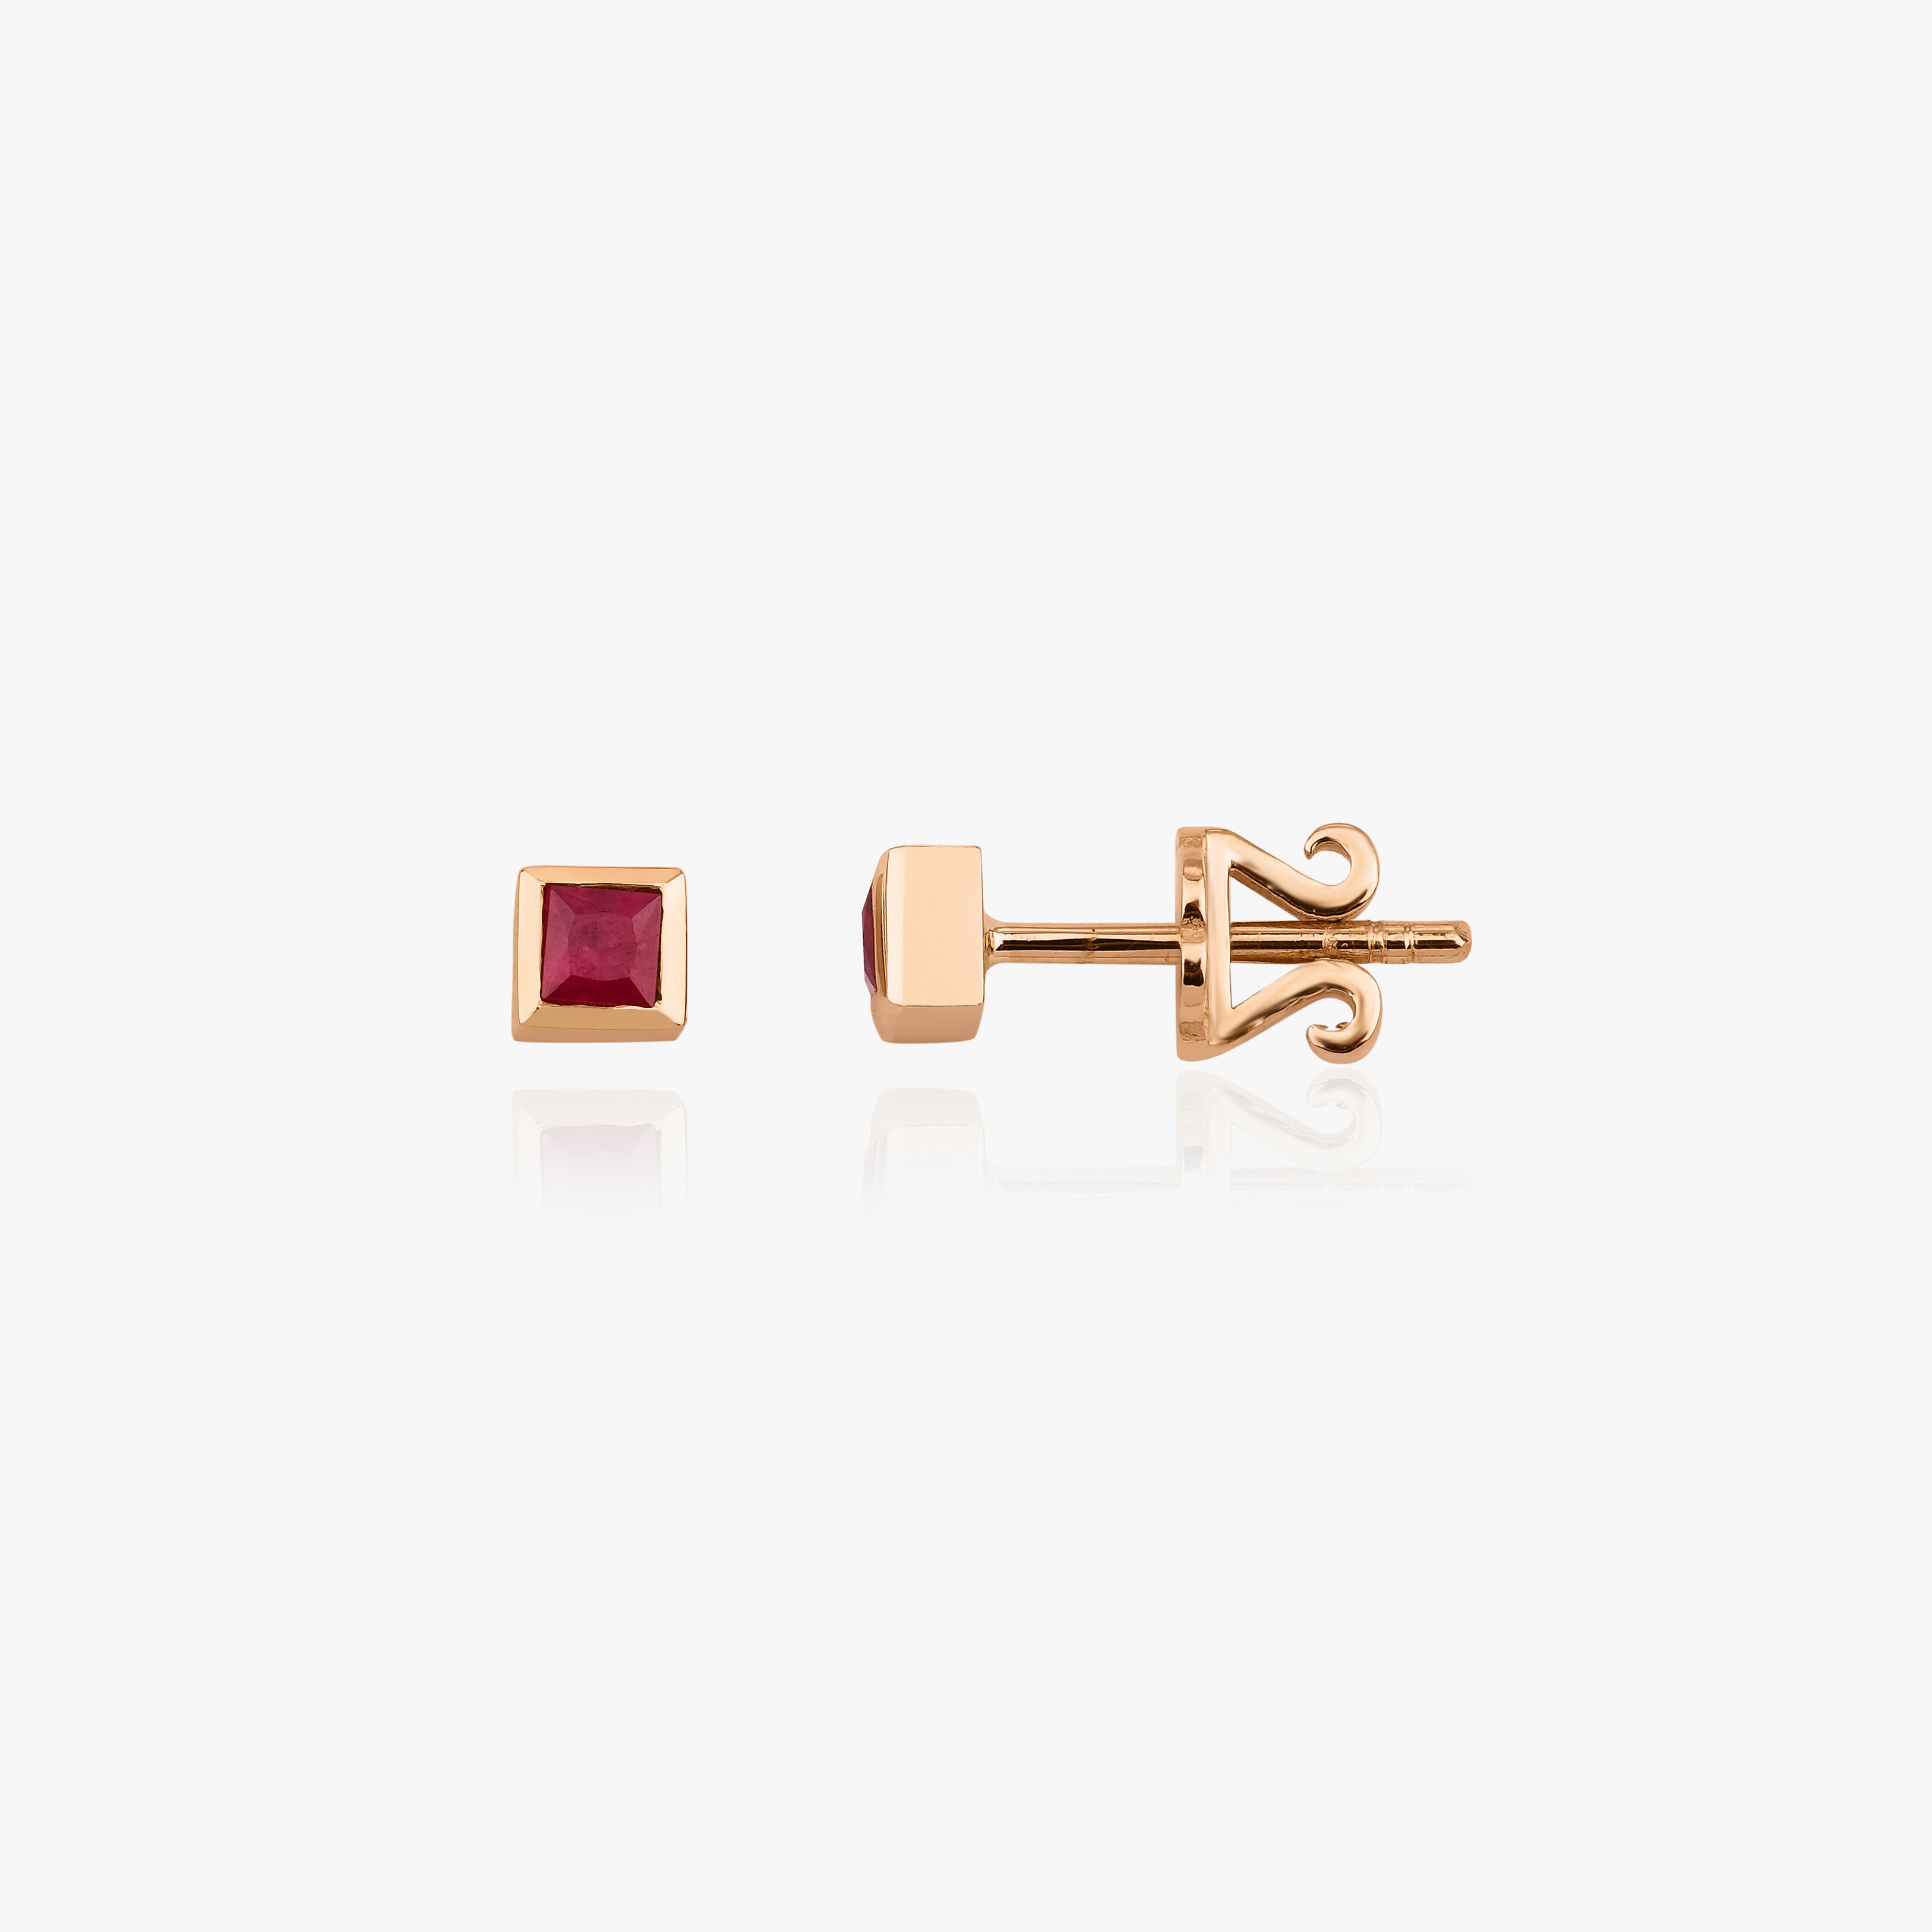 Princess Cut Ruby Earrings Available in 14K and 18K Gold